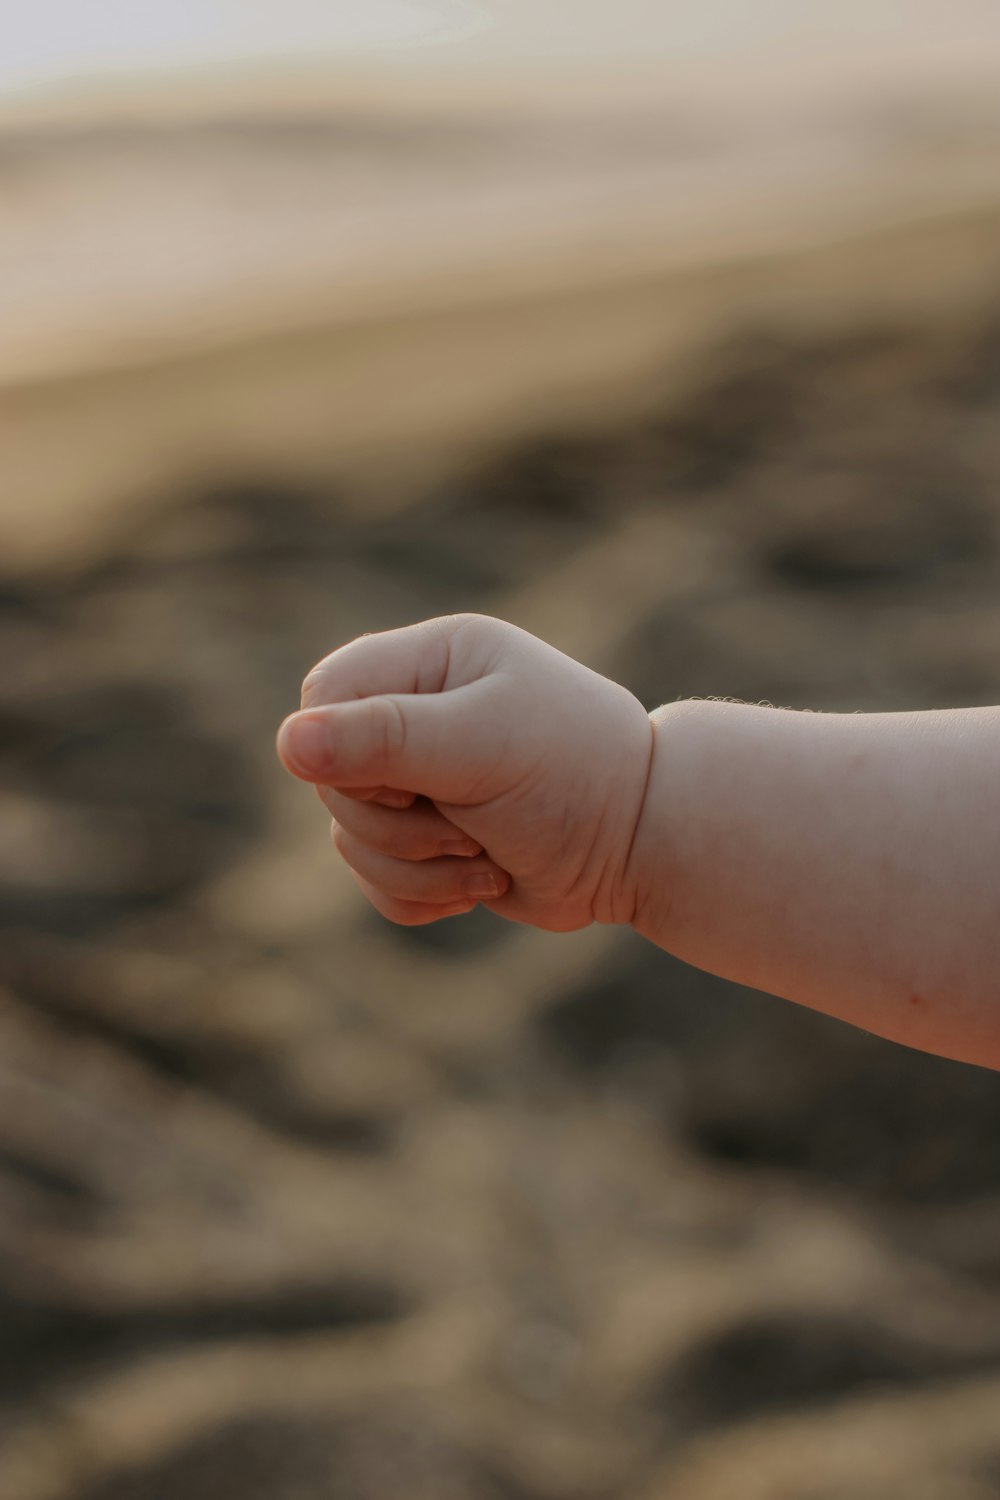 a baby's hand reaching for something in the air